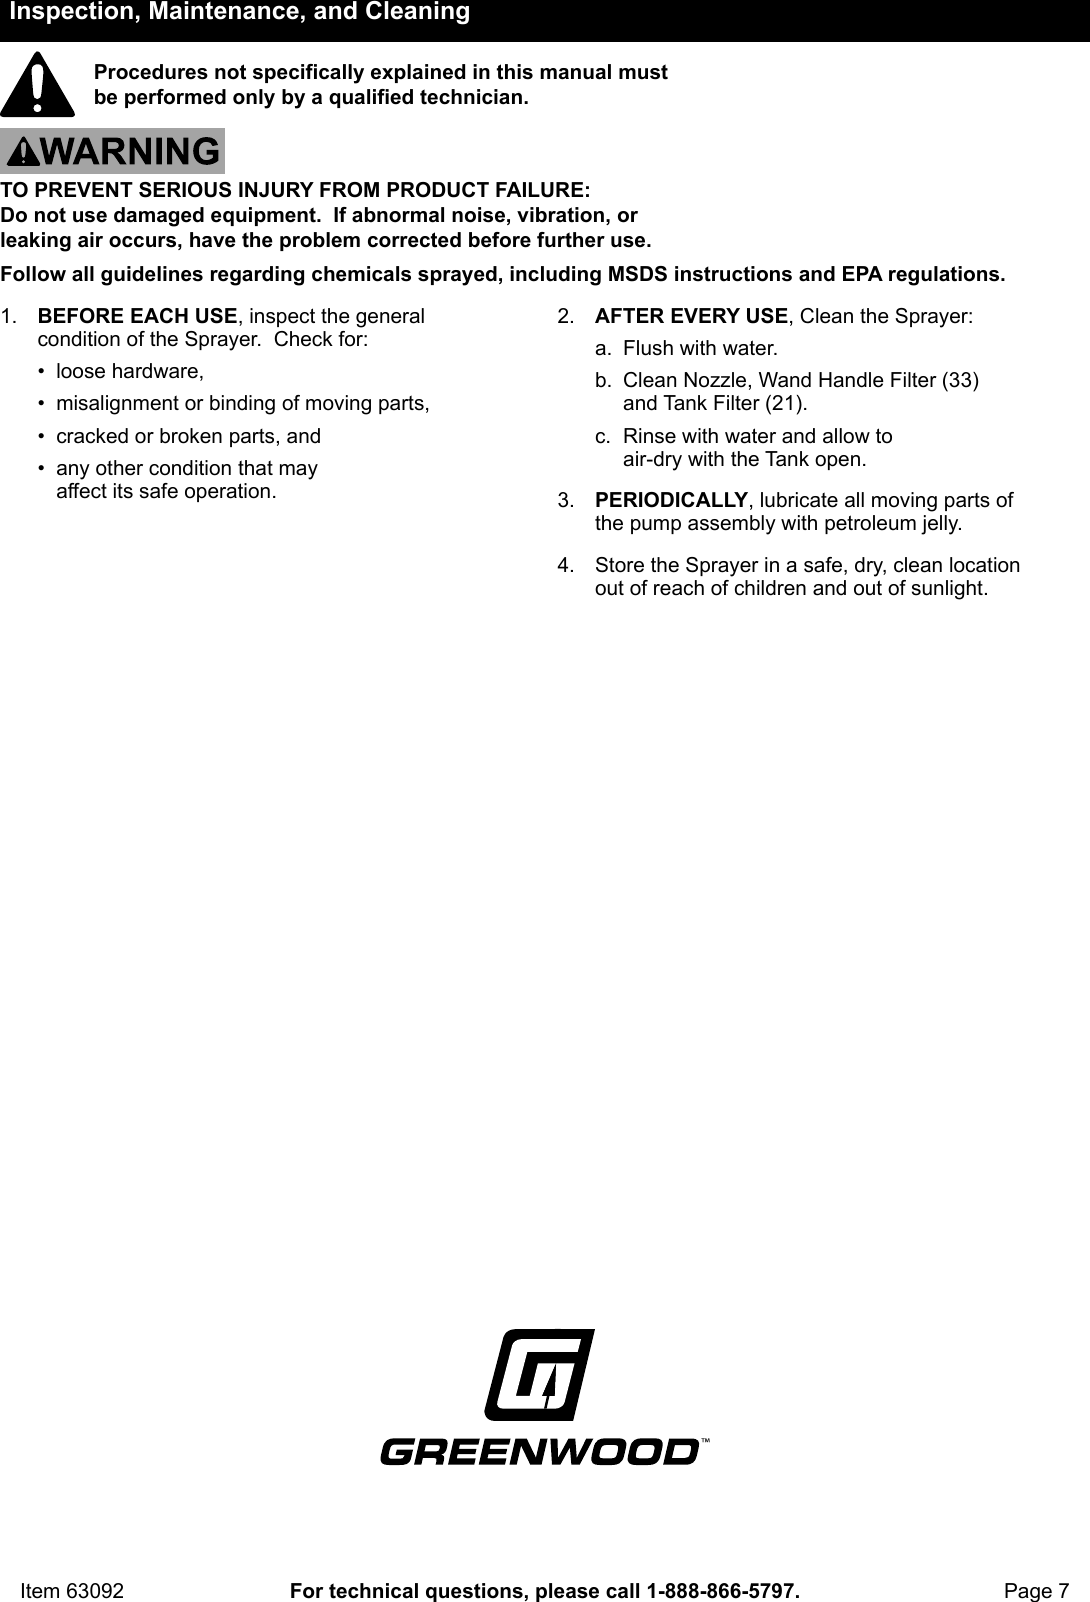 Page 7 of 12 - Manual For The 63092 4 Gal. Backpack Sprayer